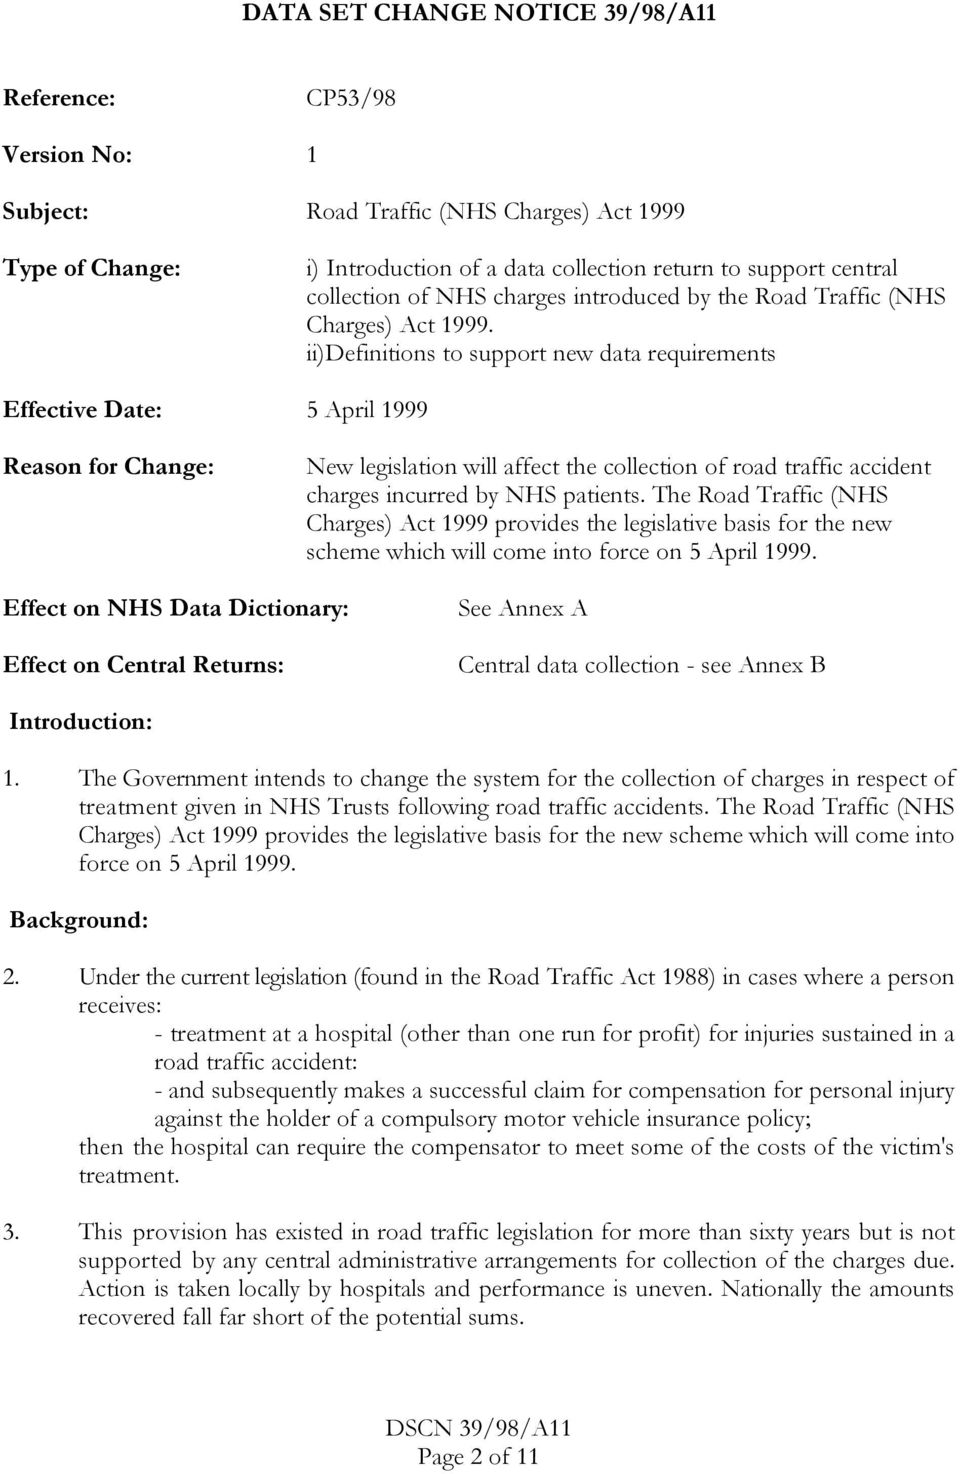 ii)definitions to support new data requirements Effective Date: 5 April 1999 Reason for Change: New legislation will affect the collection of road traffic accident charges incurred by NHS patients.